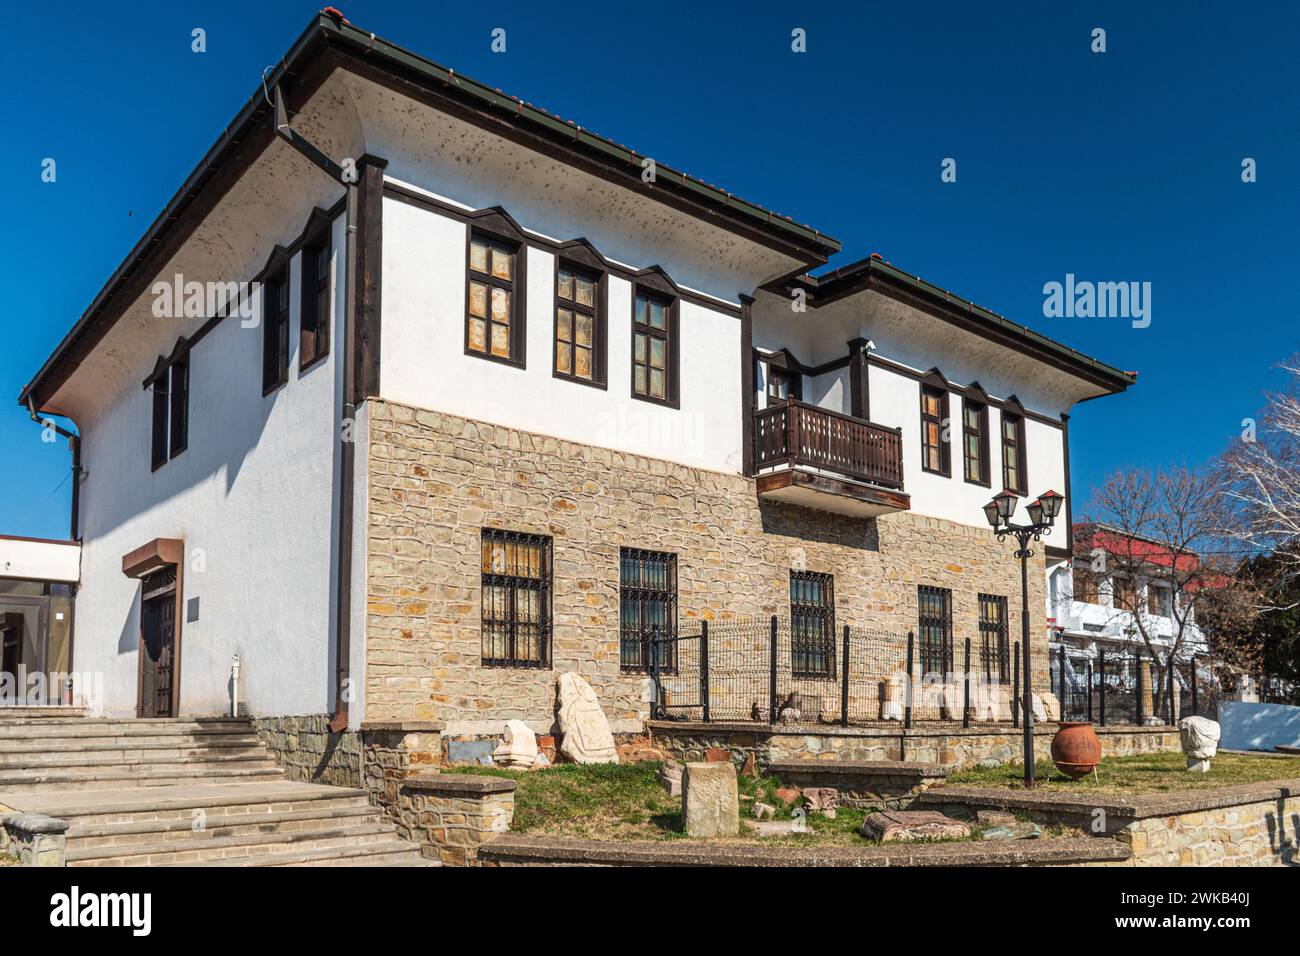 NI Institute for Conservation Cultural Monuments and Museum, Stip, Republik Nordmazedonien. Stockfoto